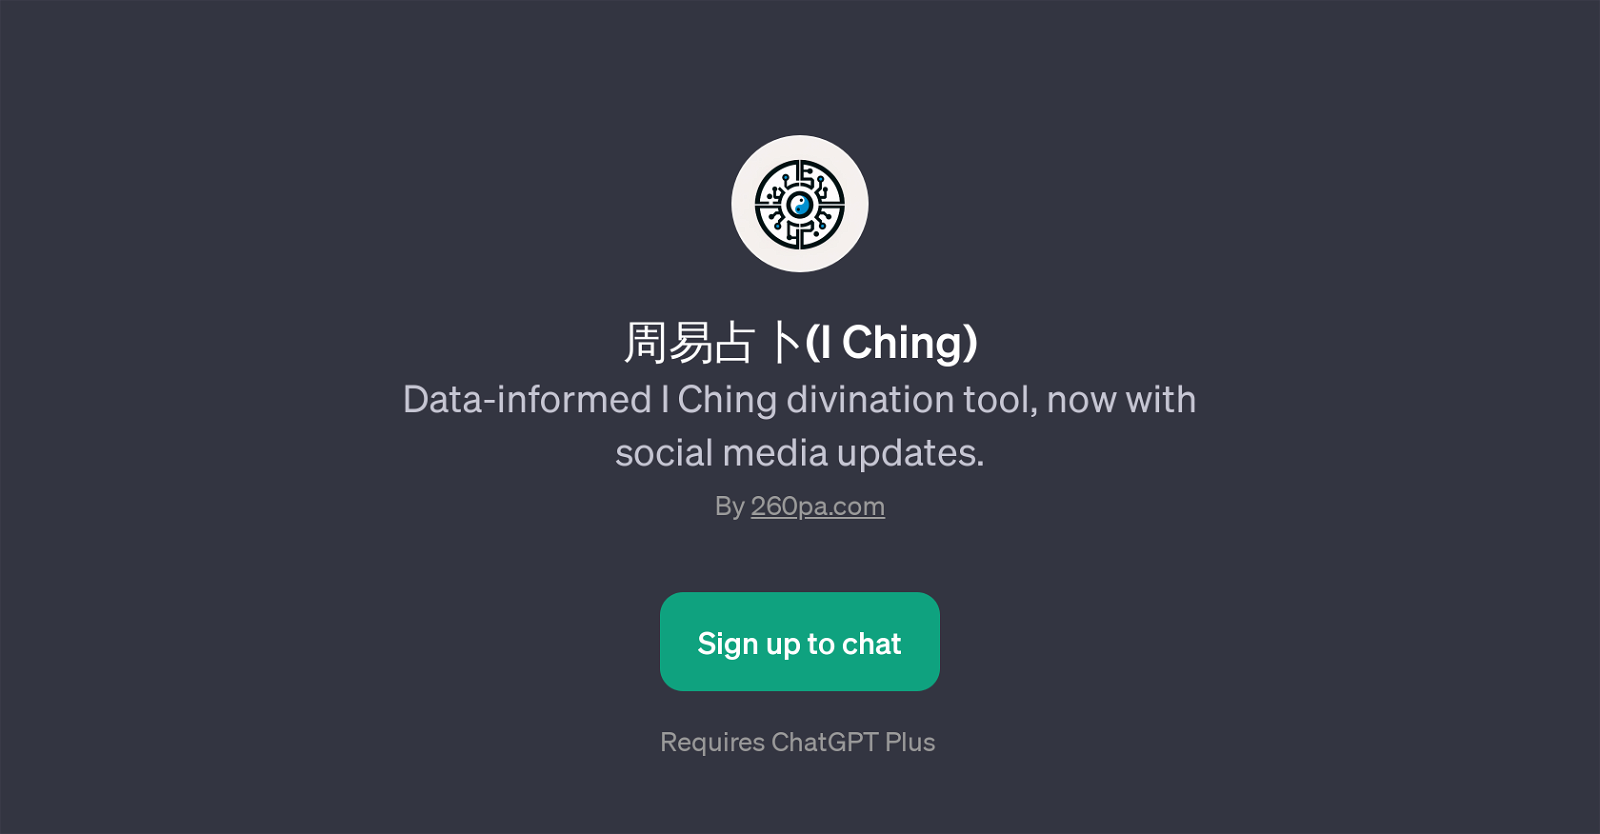 (I Ching) website